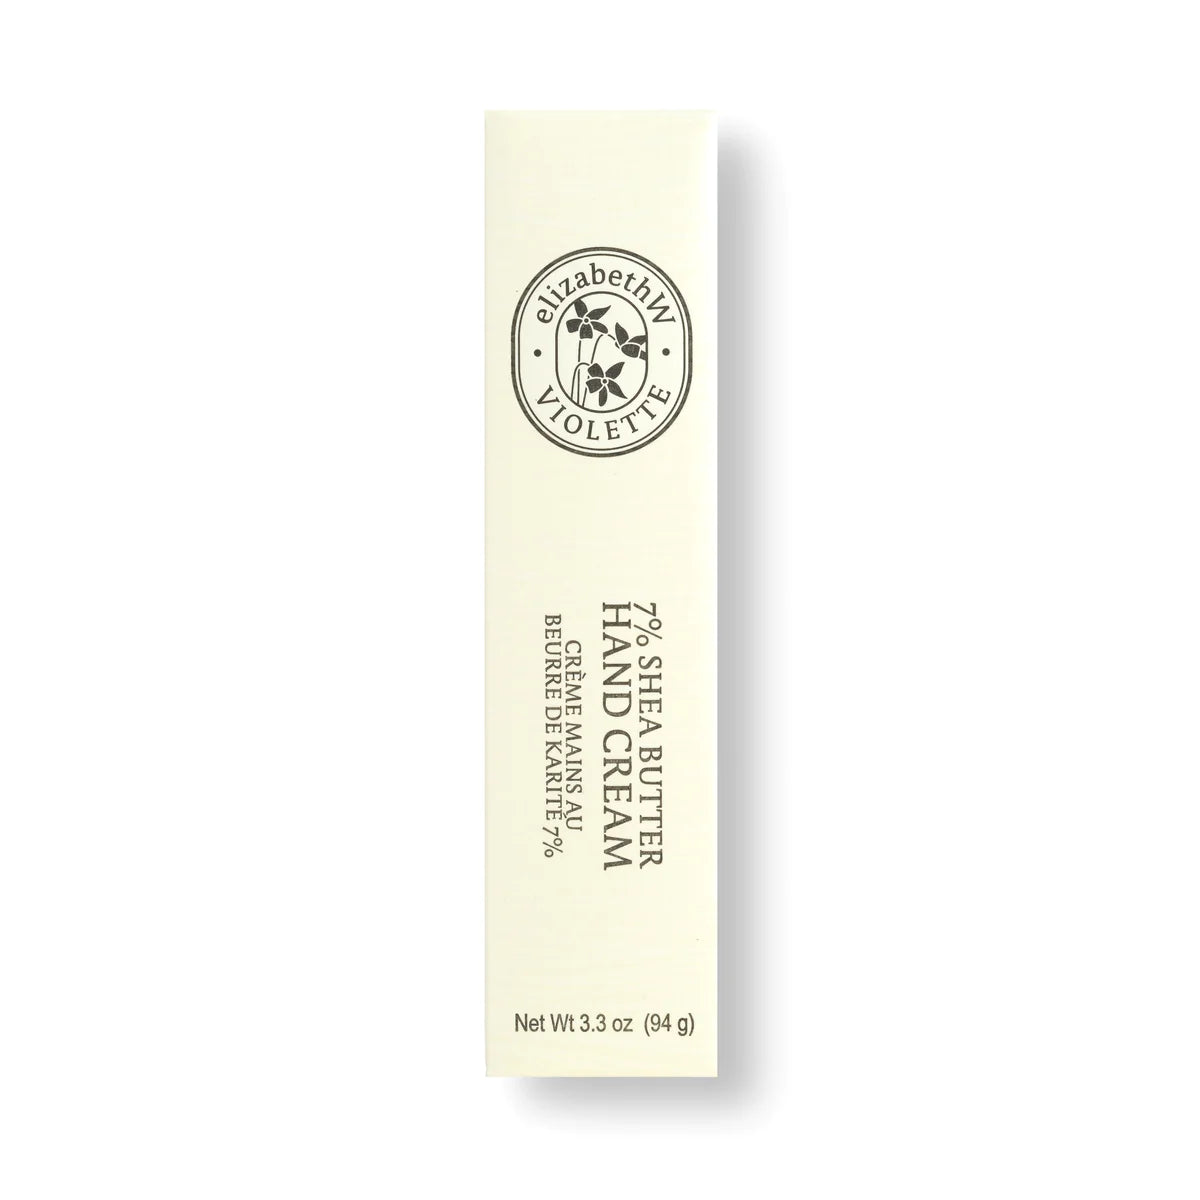 A rectangular white package for elizabeth W Atelier Violette Hand Cream with a black logo featuring a circular design, text, and stylized flowers around the edge.